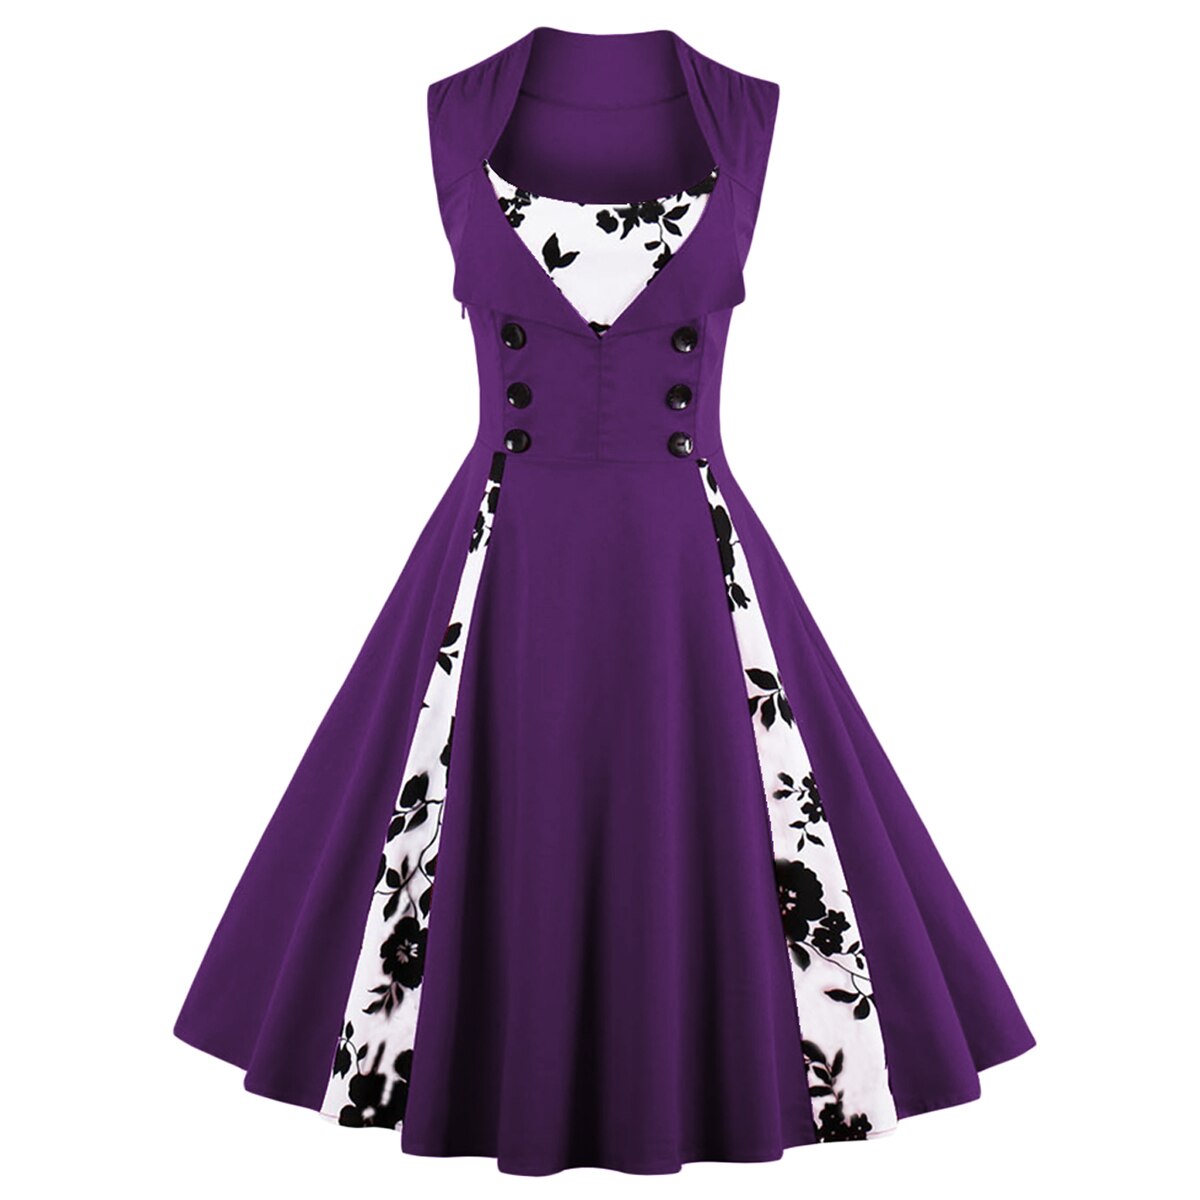 Robe Vintage 50s 60s Retro Cotton Patchwork Pin Up Swing Party Polka Dot Women Casual Dresses